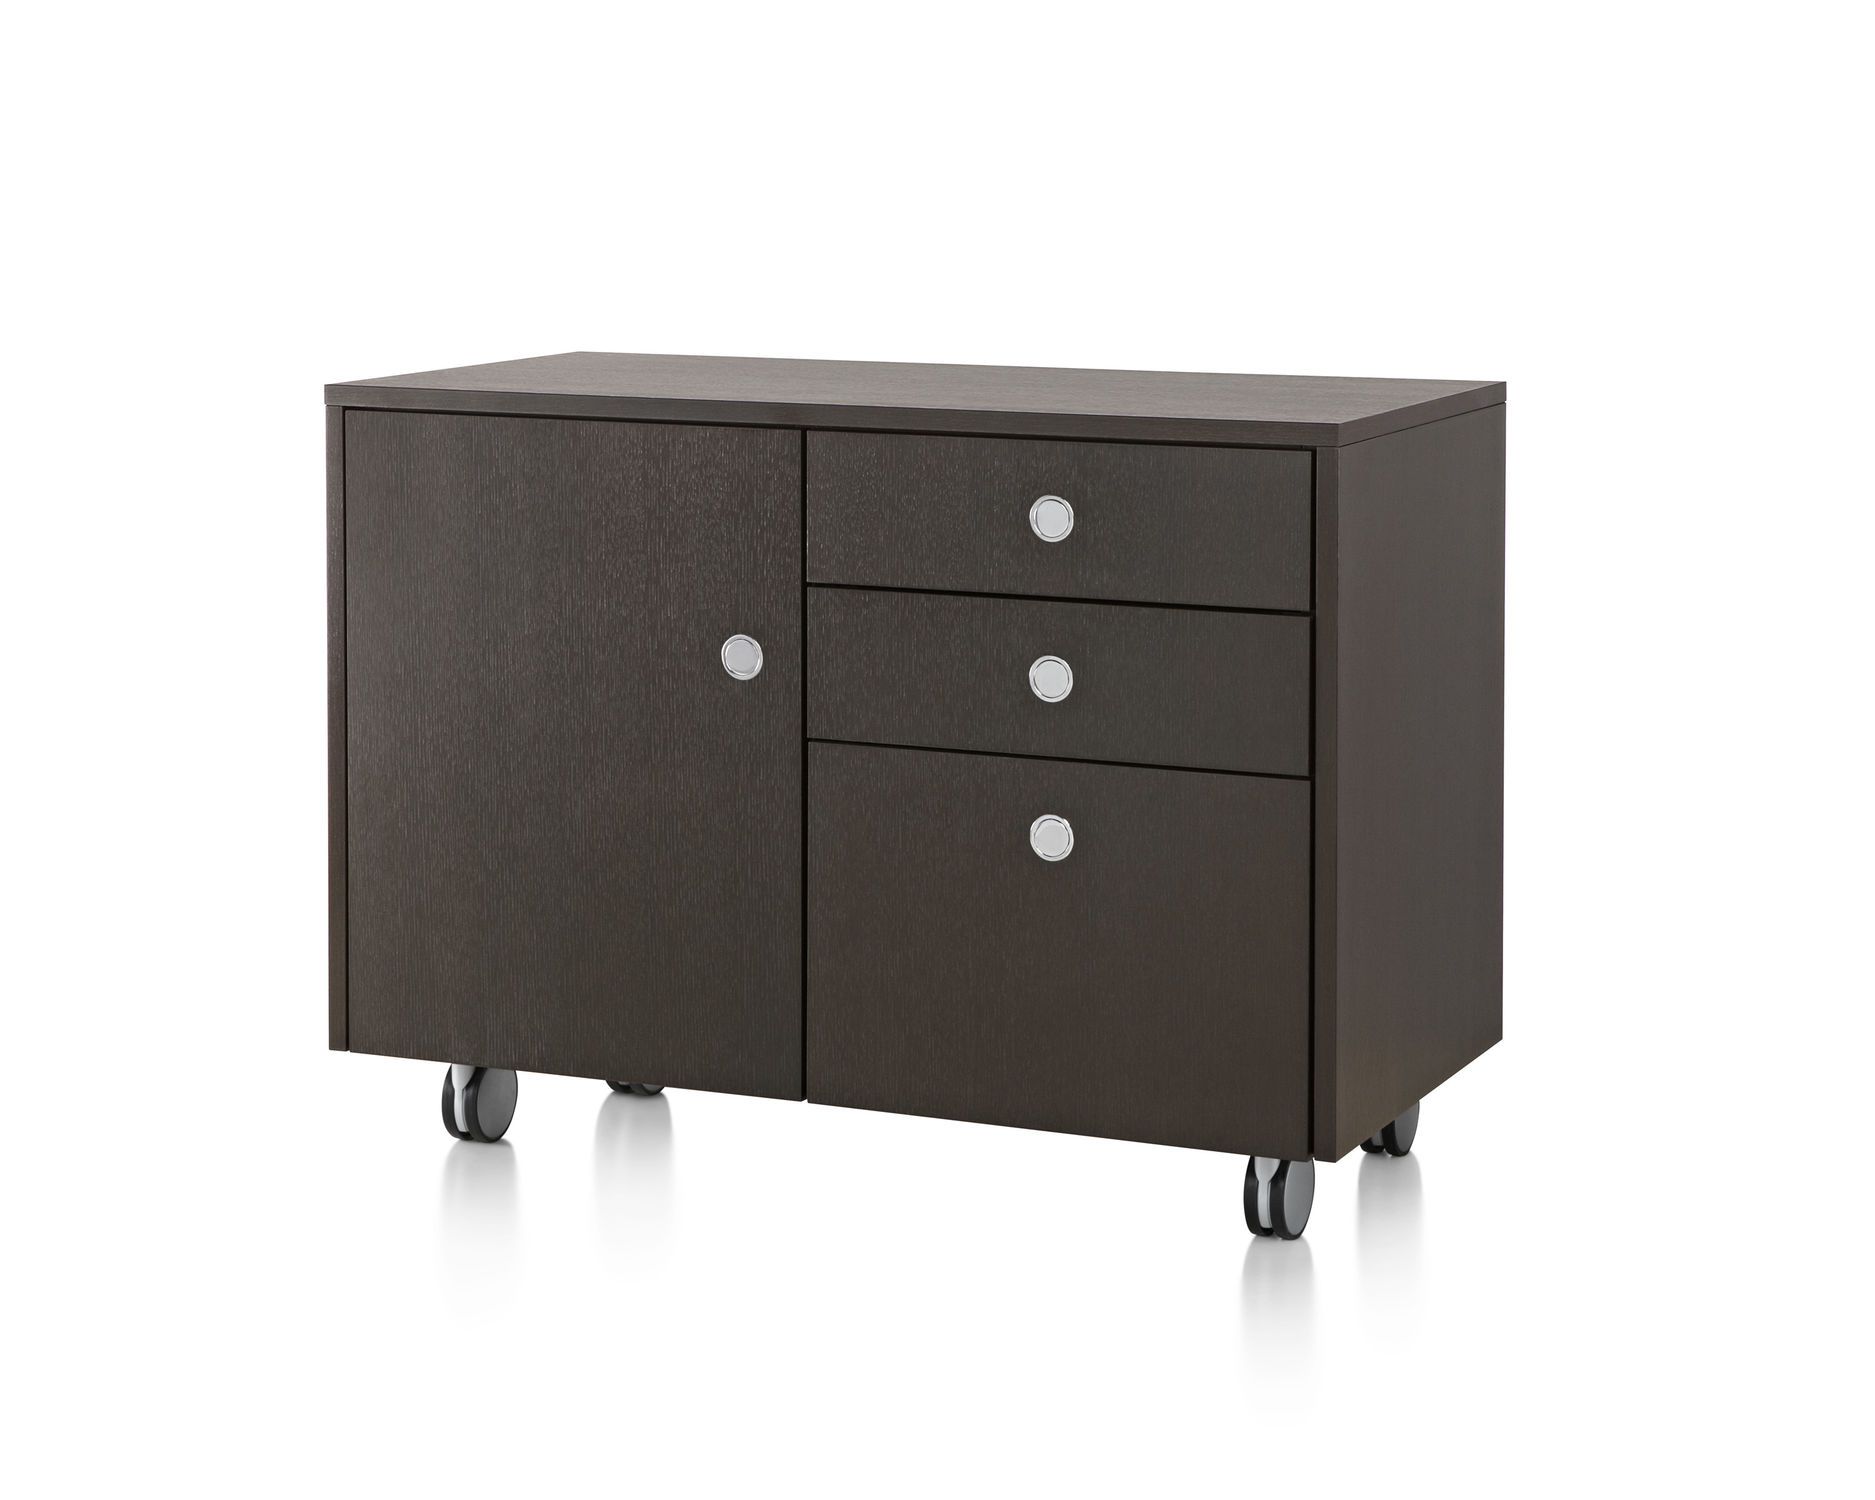 Healthcare facility chest of drawers Sled Base Herman Miller